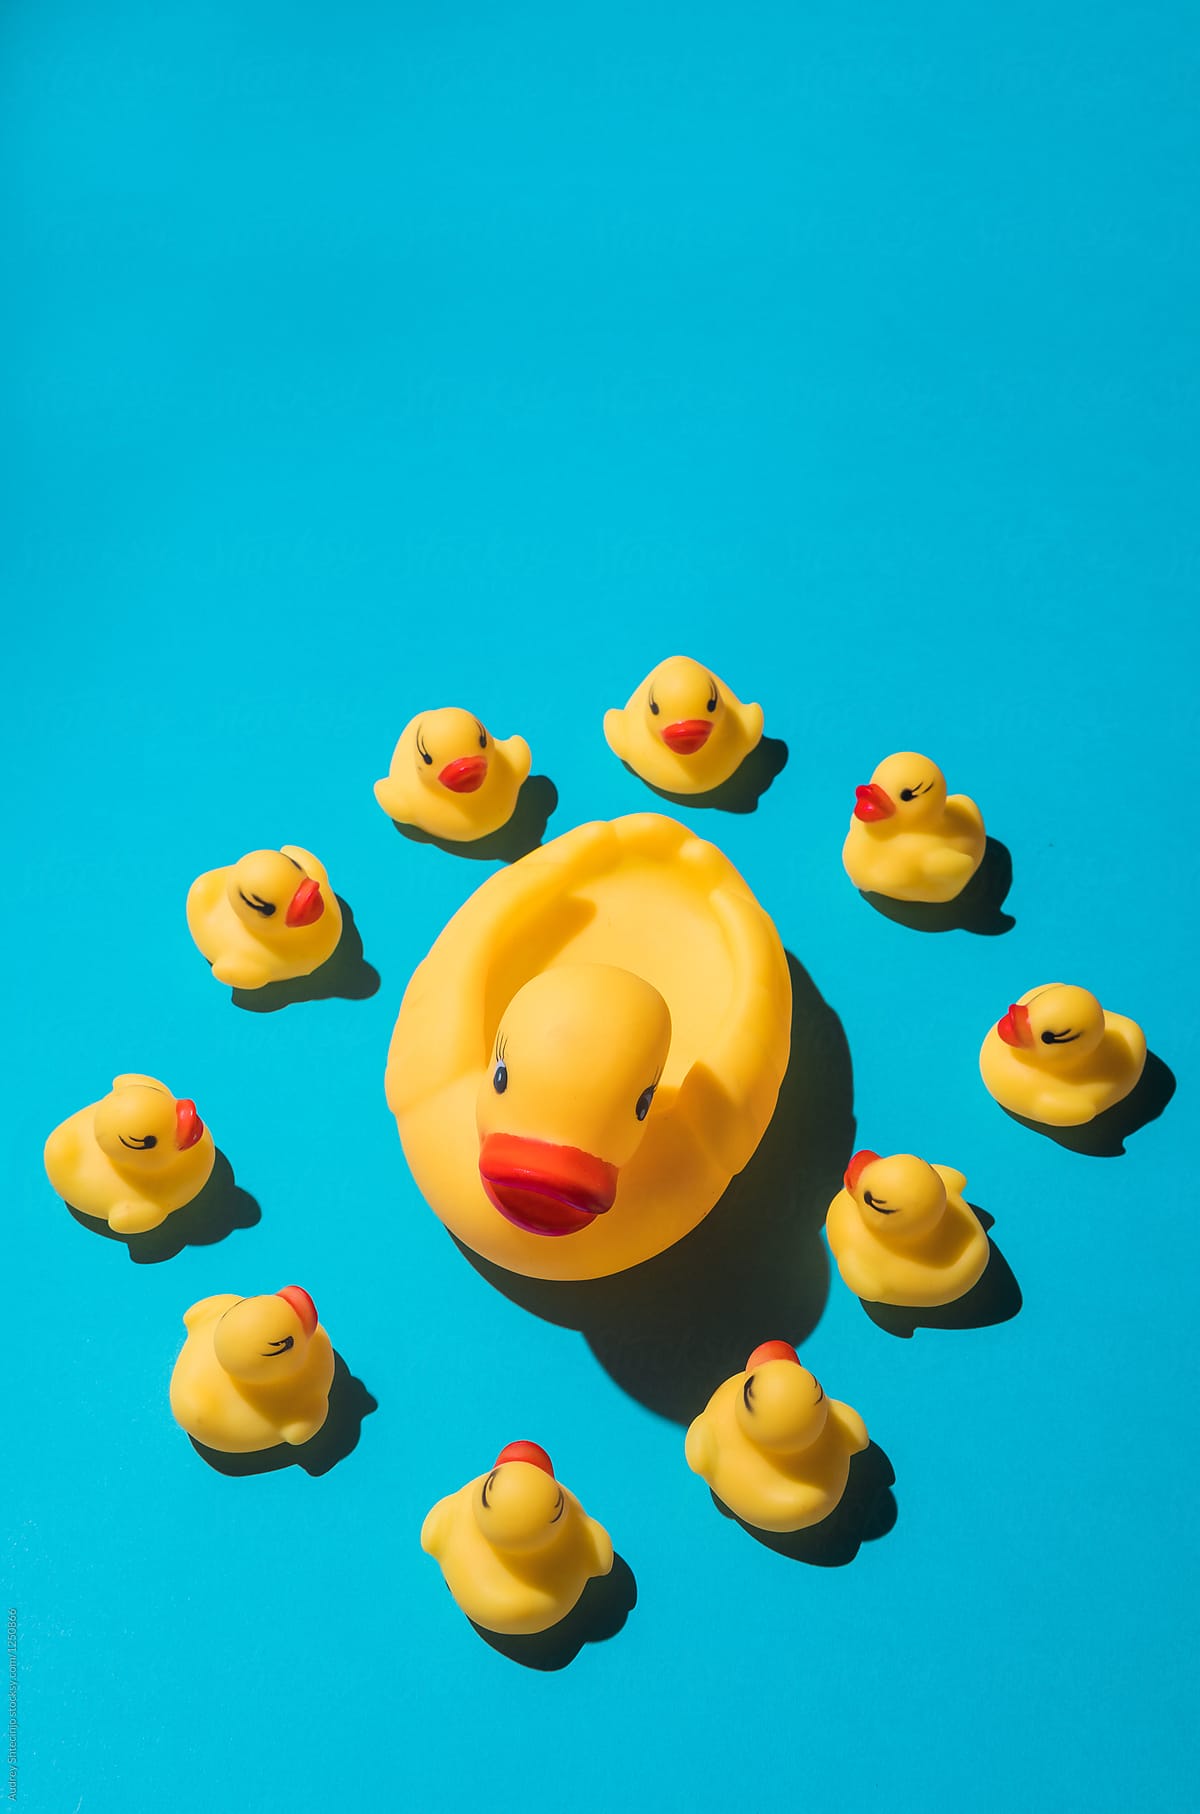 Baby ducks/toys with mom/big duck  on blue background.